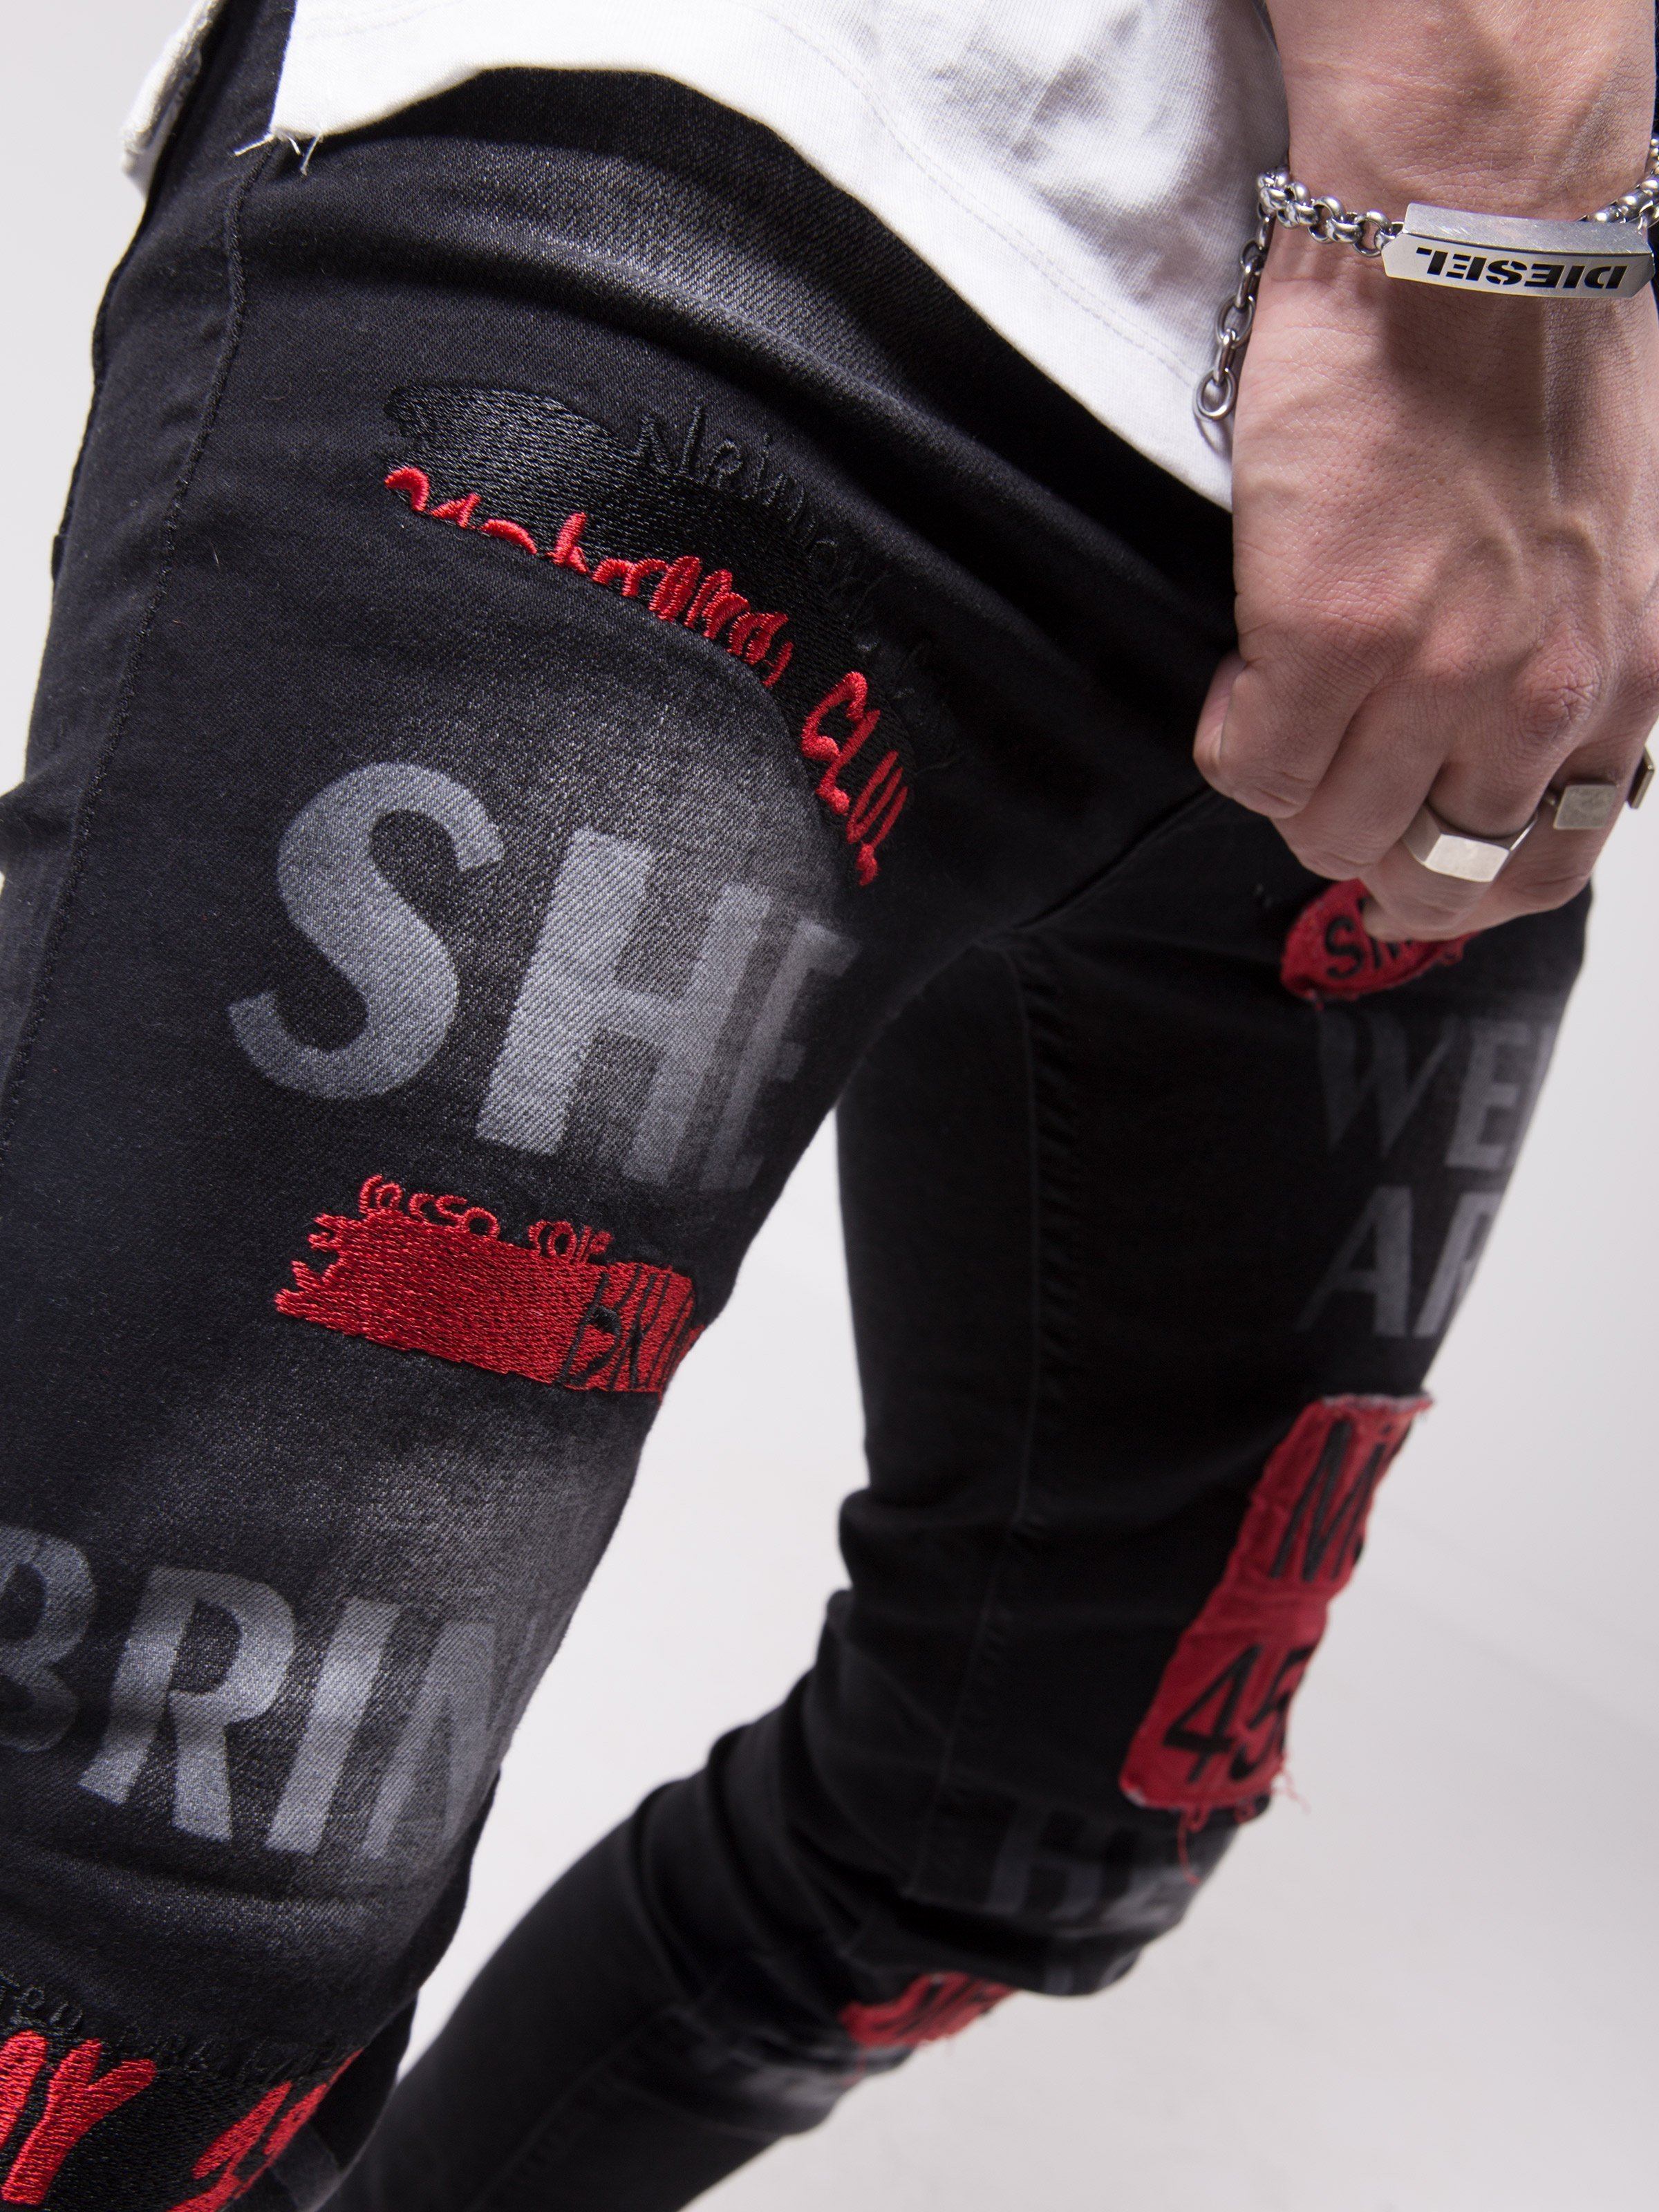 A man wearing a pair of GHETTO BIRD jeans with red writing on them.